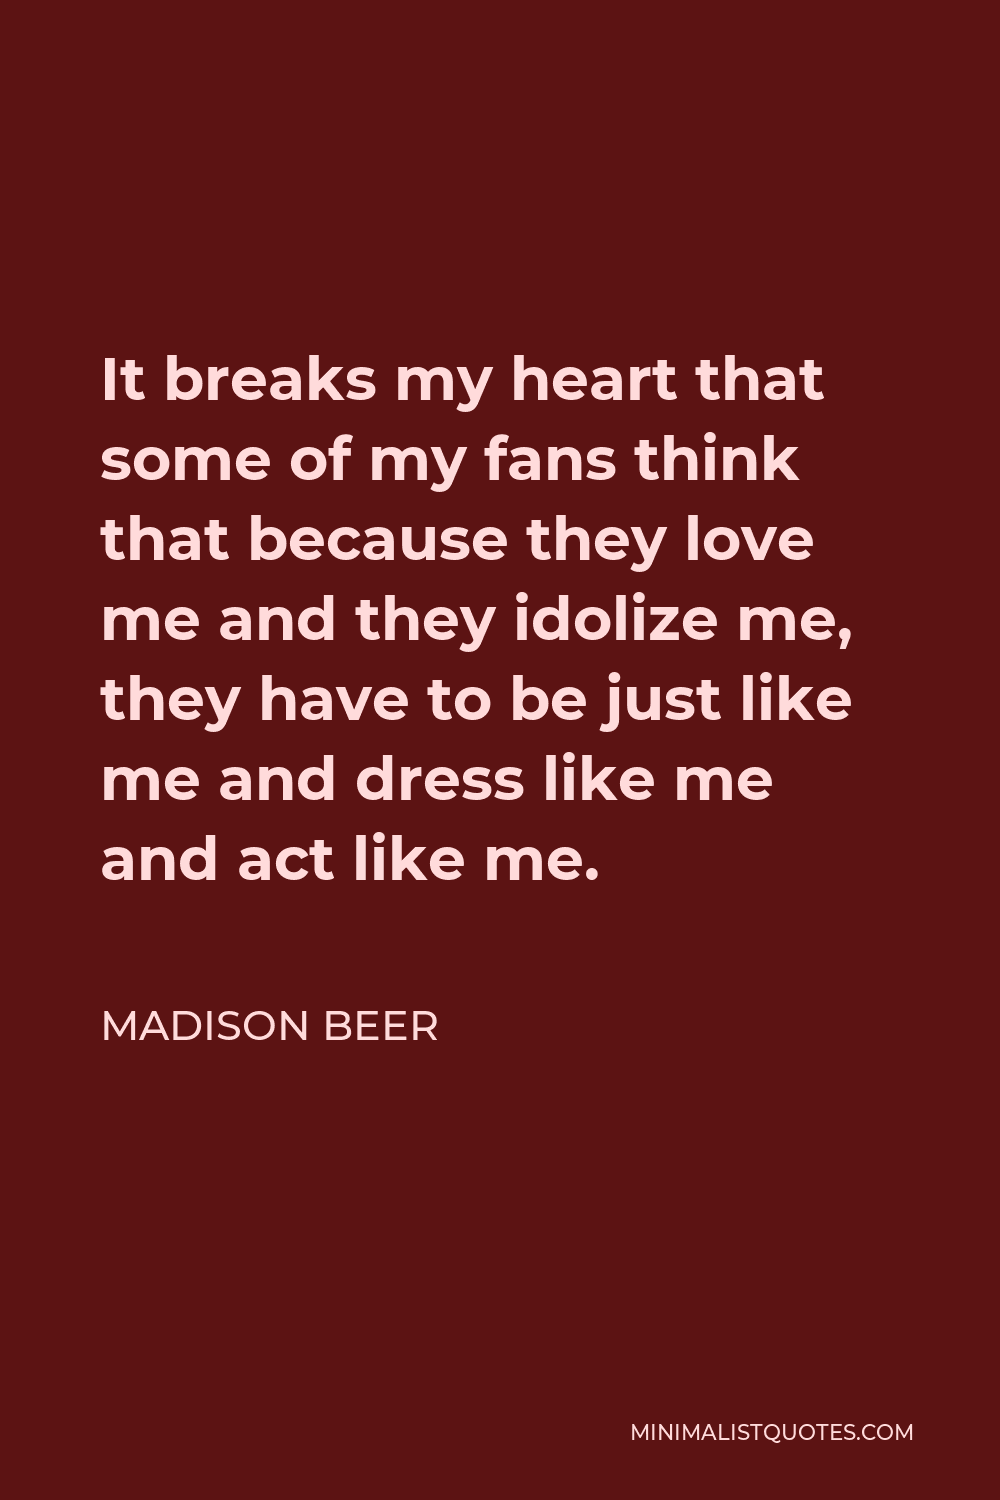 Madison Beer Quote - It breaks my heart that some of my fans think that because they love me and they idolize me, they have to be just like me and dress like me and act like me.